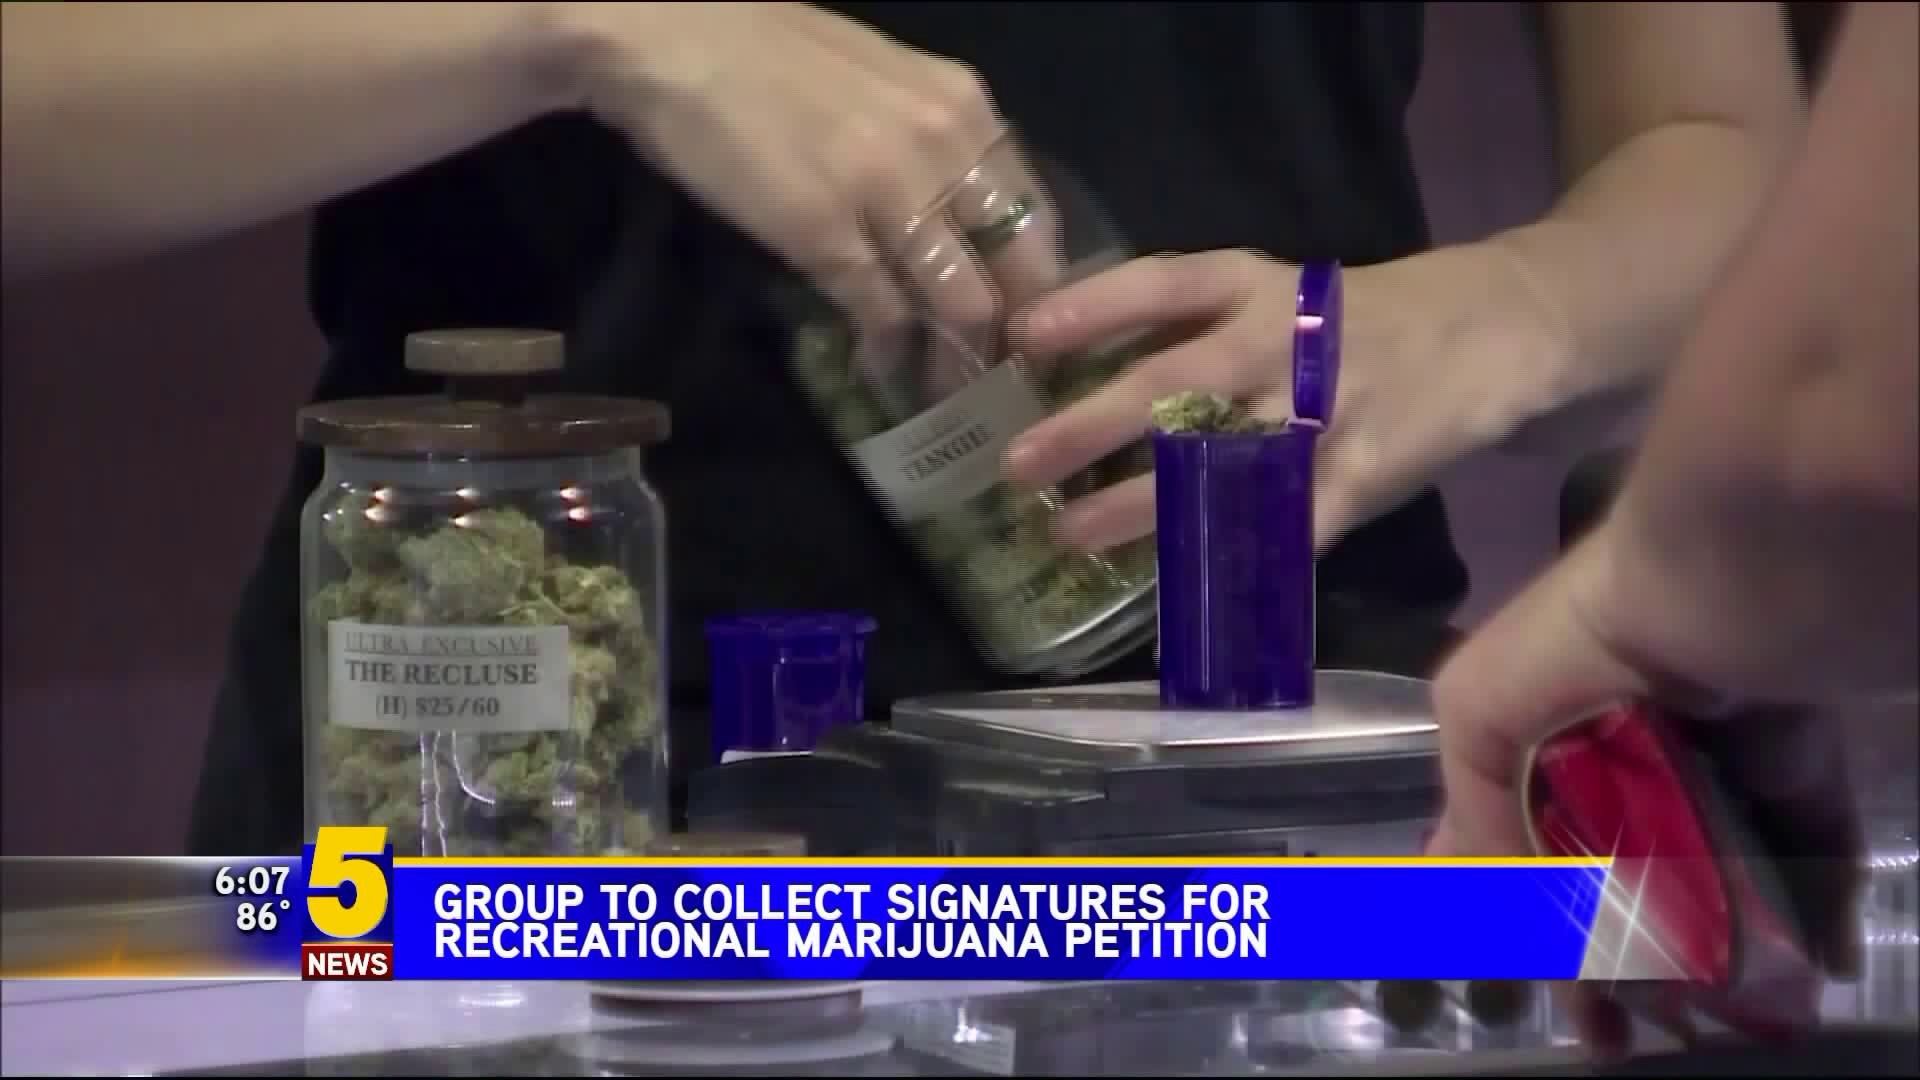 Group To Collect Signatures For Recreational Marijuana Petition